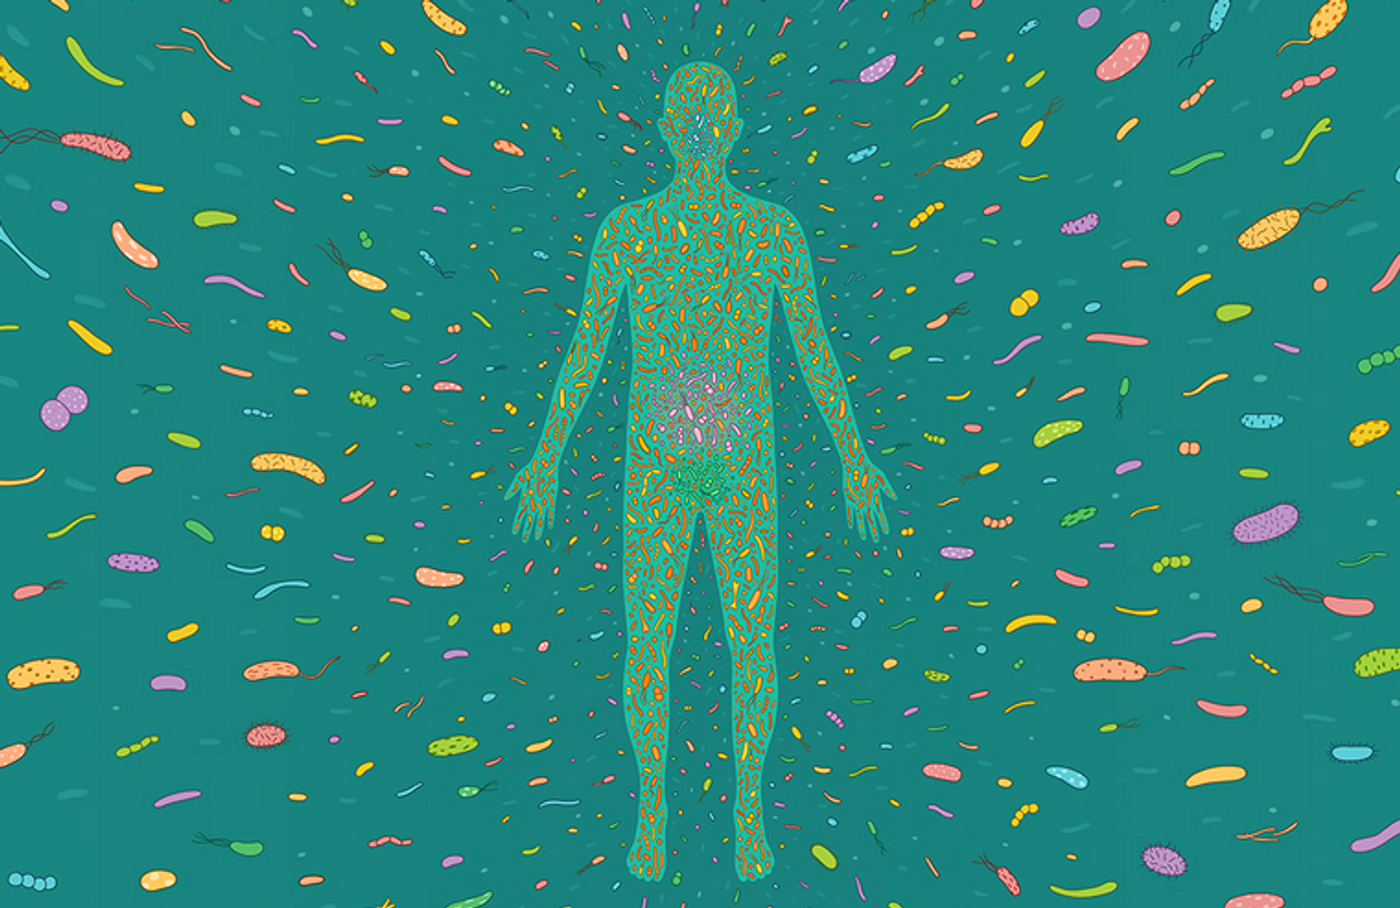 New research reports gut microbes in the lungs.